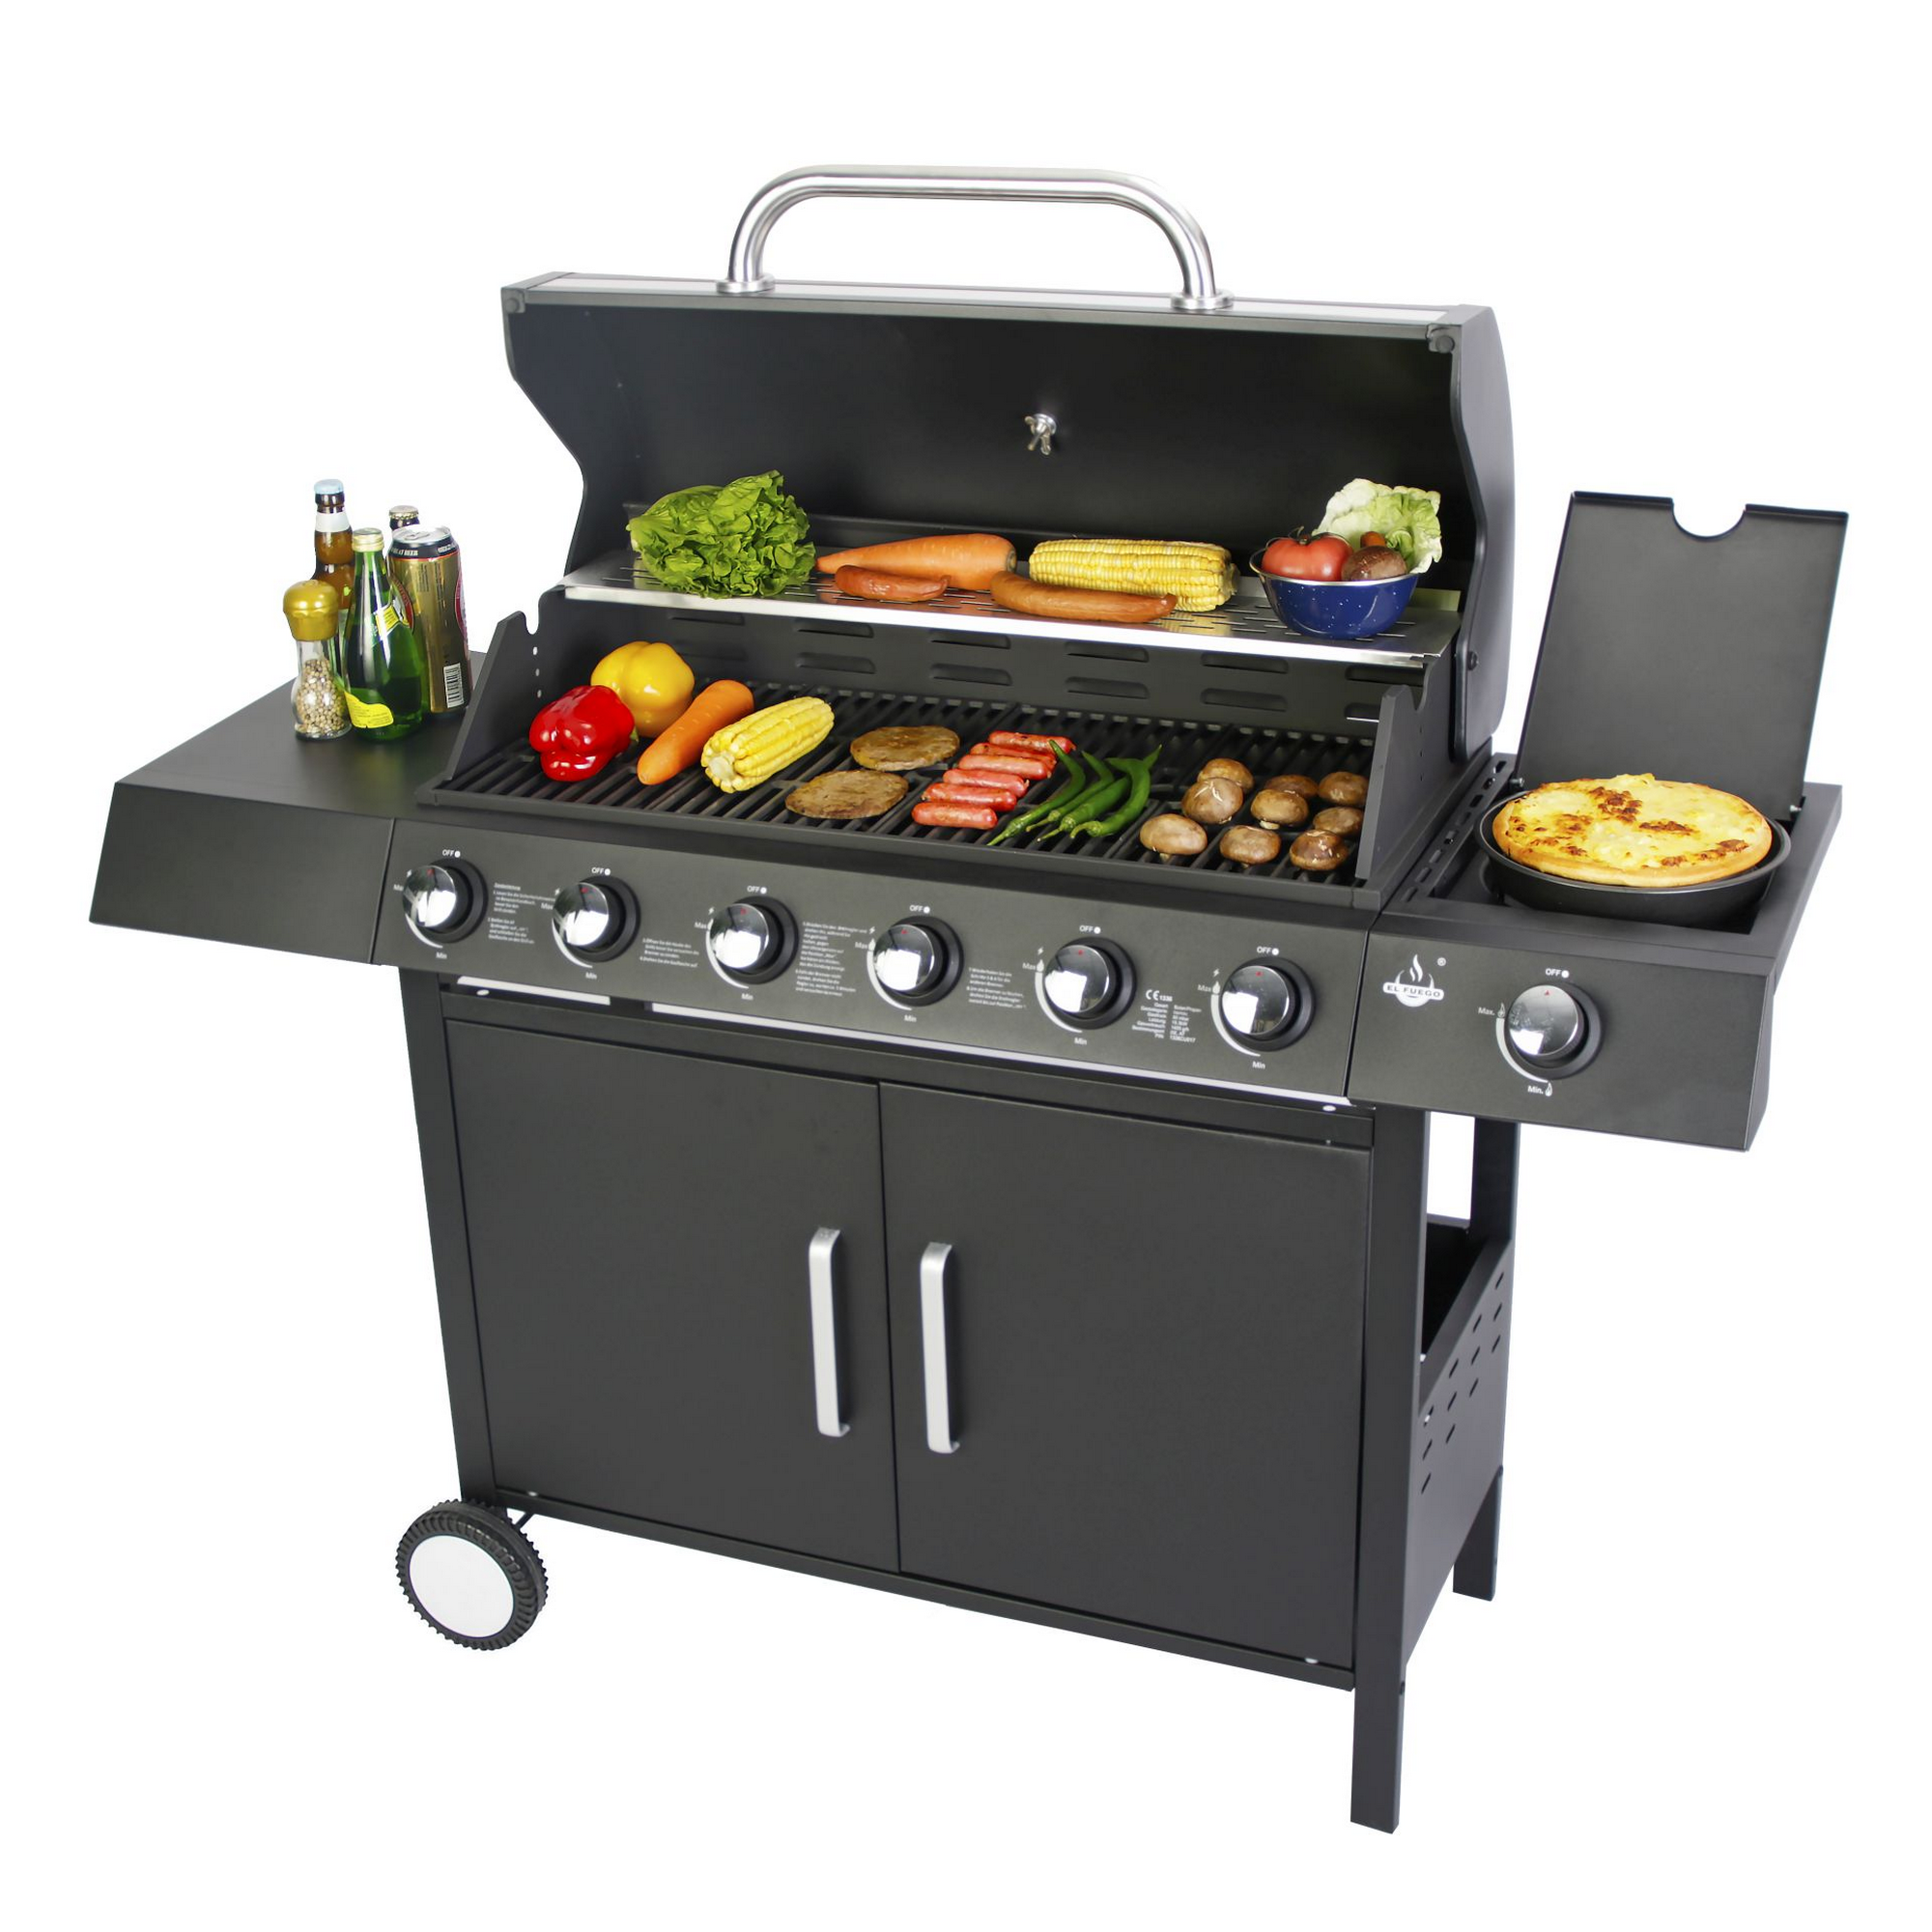 Gasgrill 'San Angelo' schwarz 110 x 141 x 48 cm + product picture